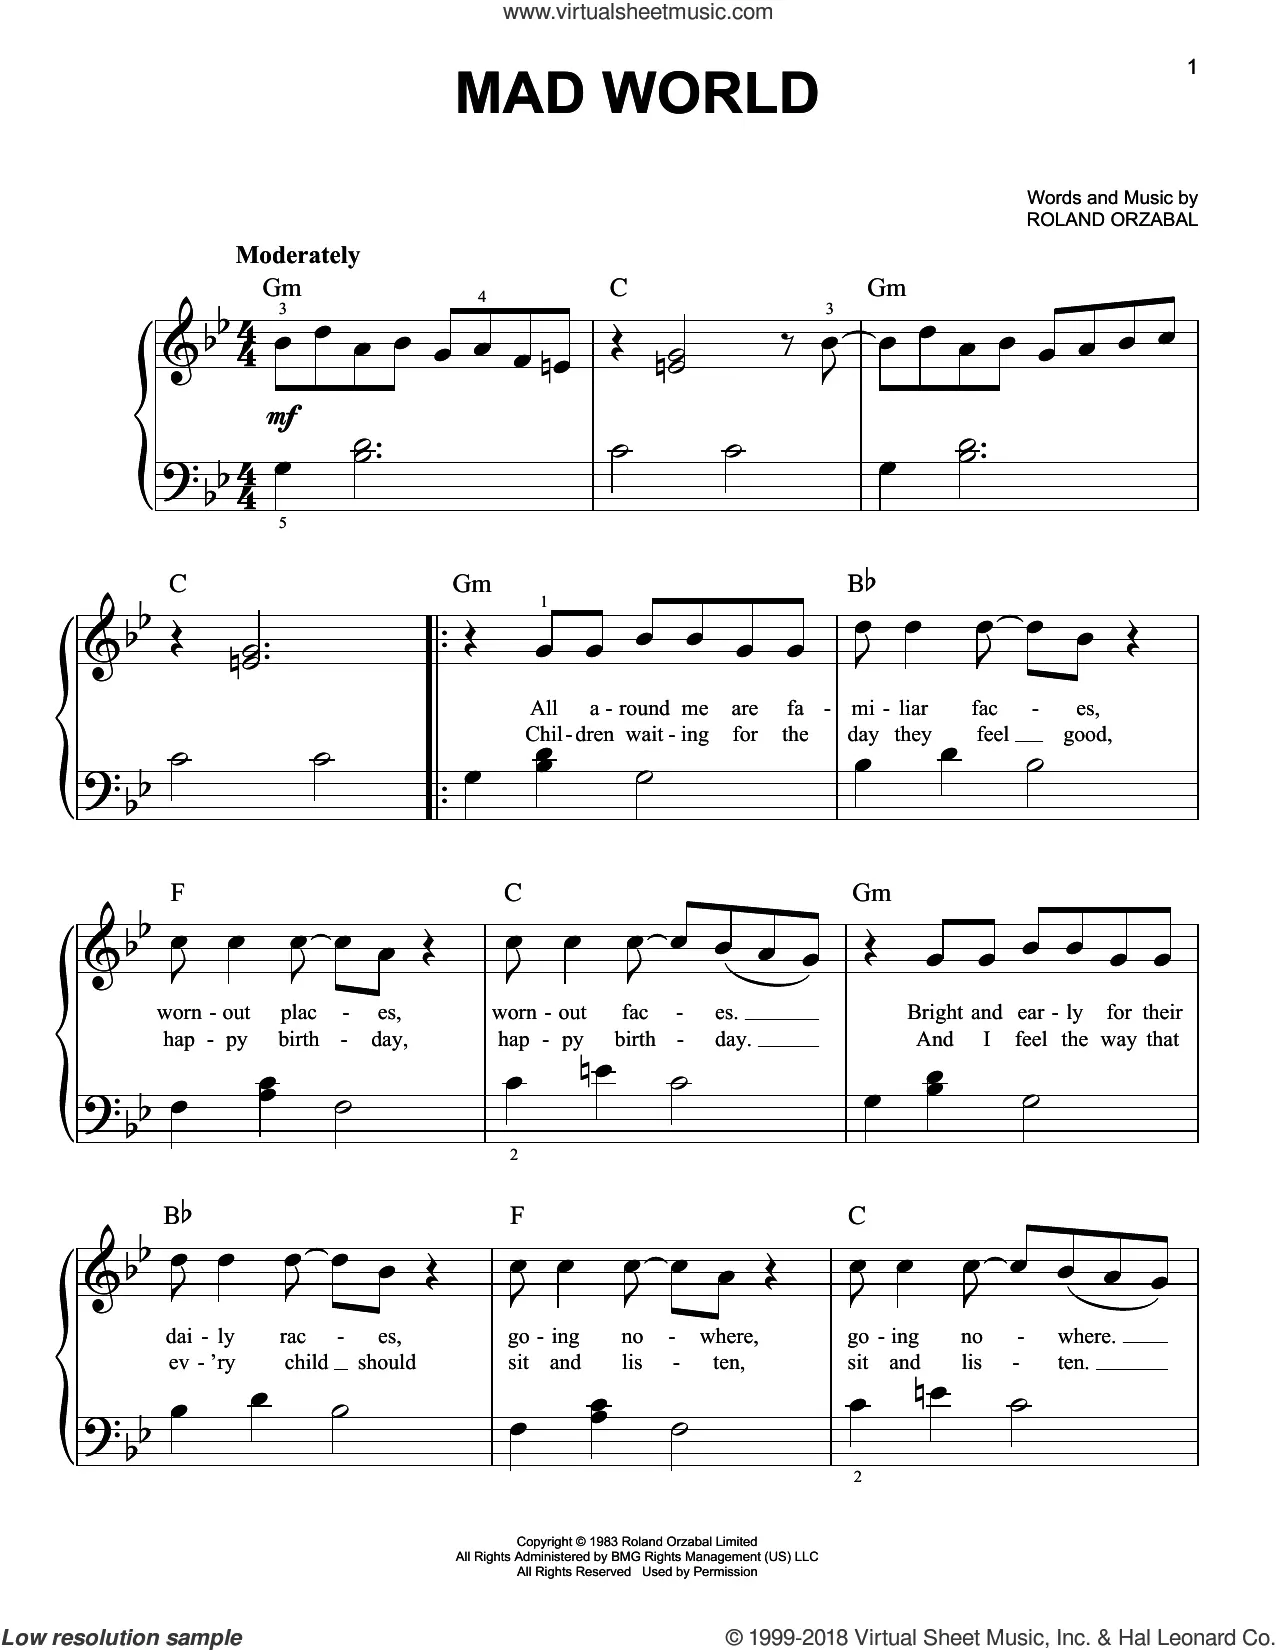 ☆ Tears For Fears-Woman In Chains Sheet Music pdf, - Free Score Download ☆